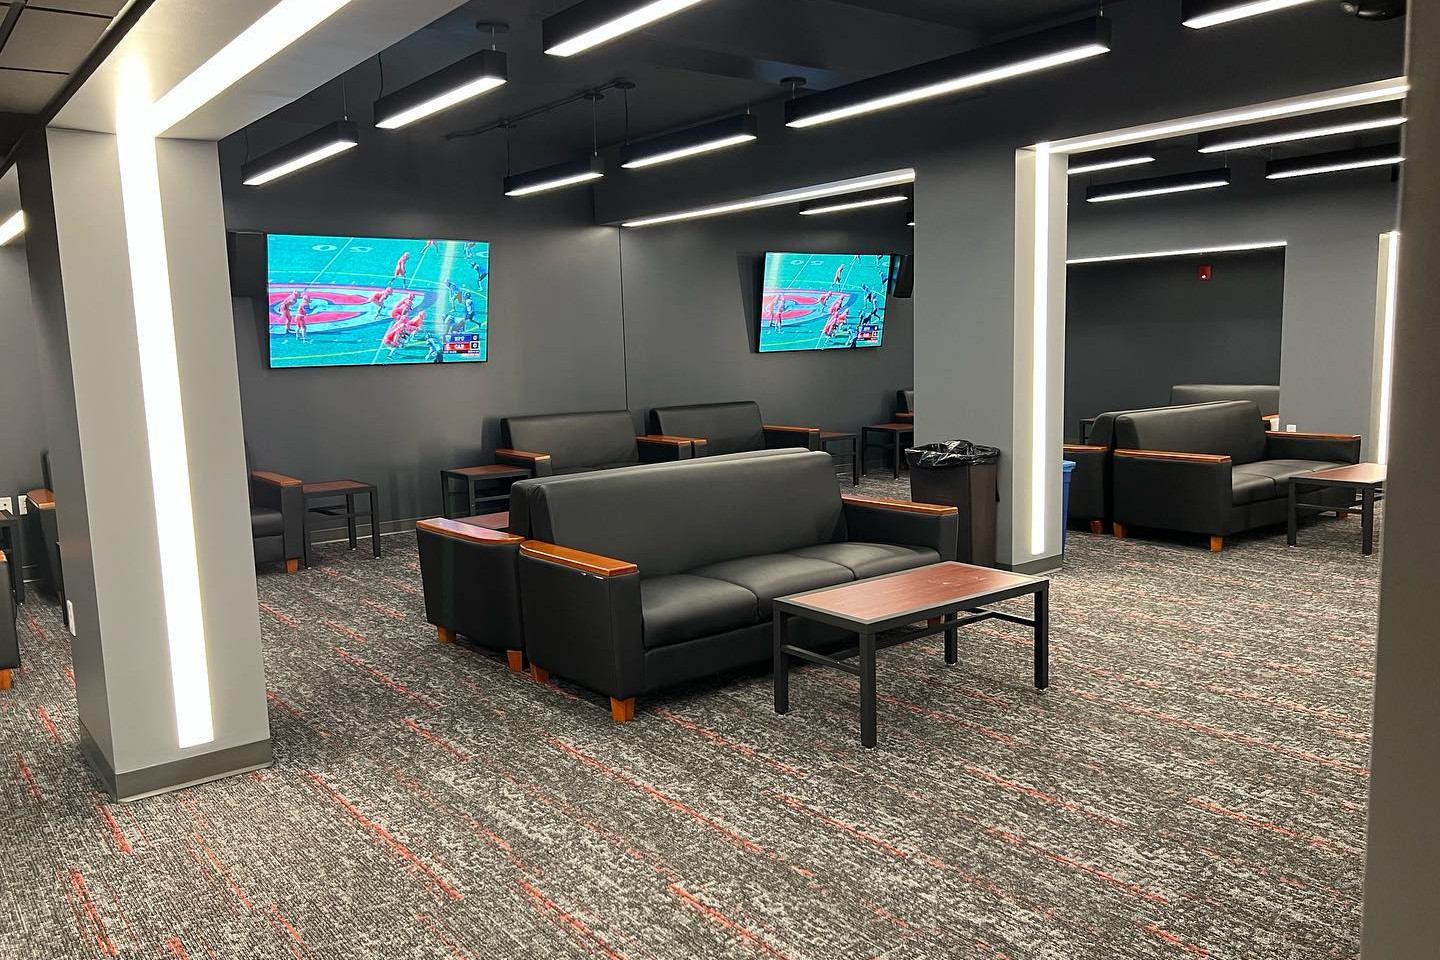 All Carthage students are welcome to visit the Esports Arena to play games, watch movies, or hang...